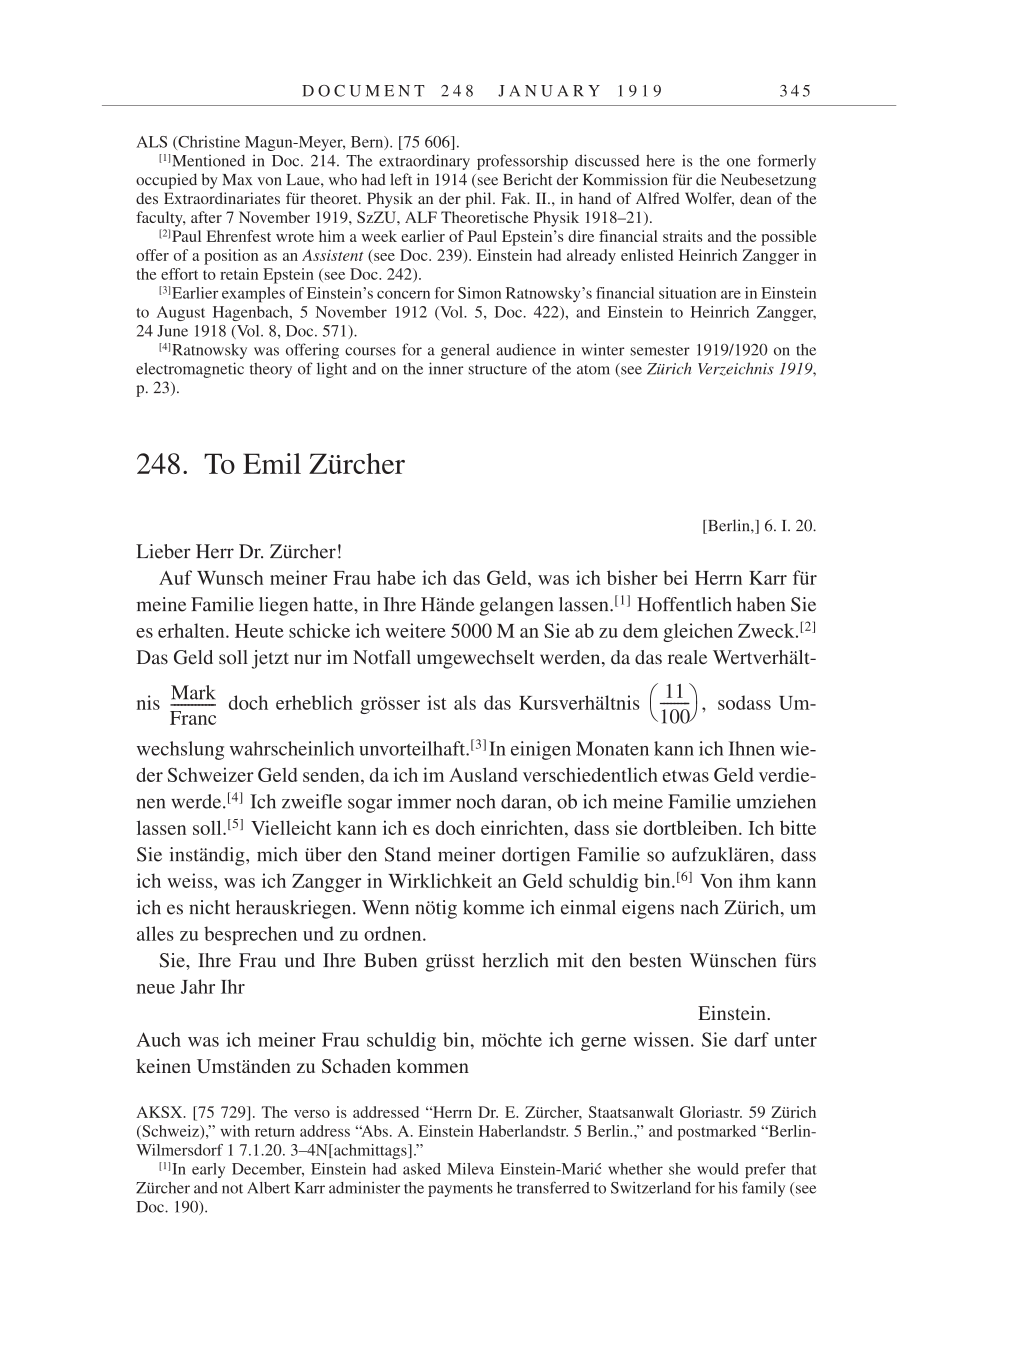 Volume 9: The Berlin Years: Correspondence January 1919-April 1920 page 345